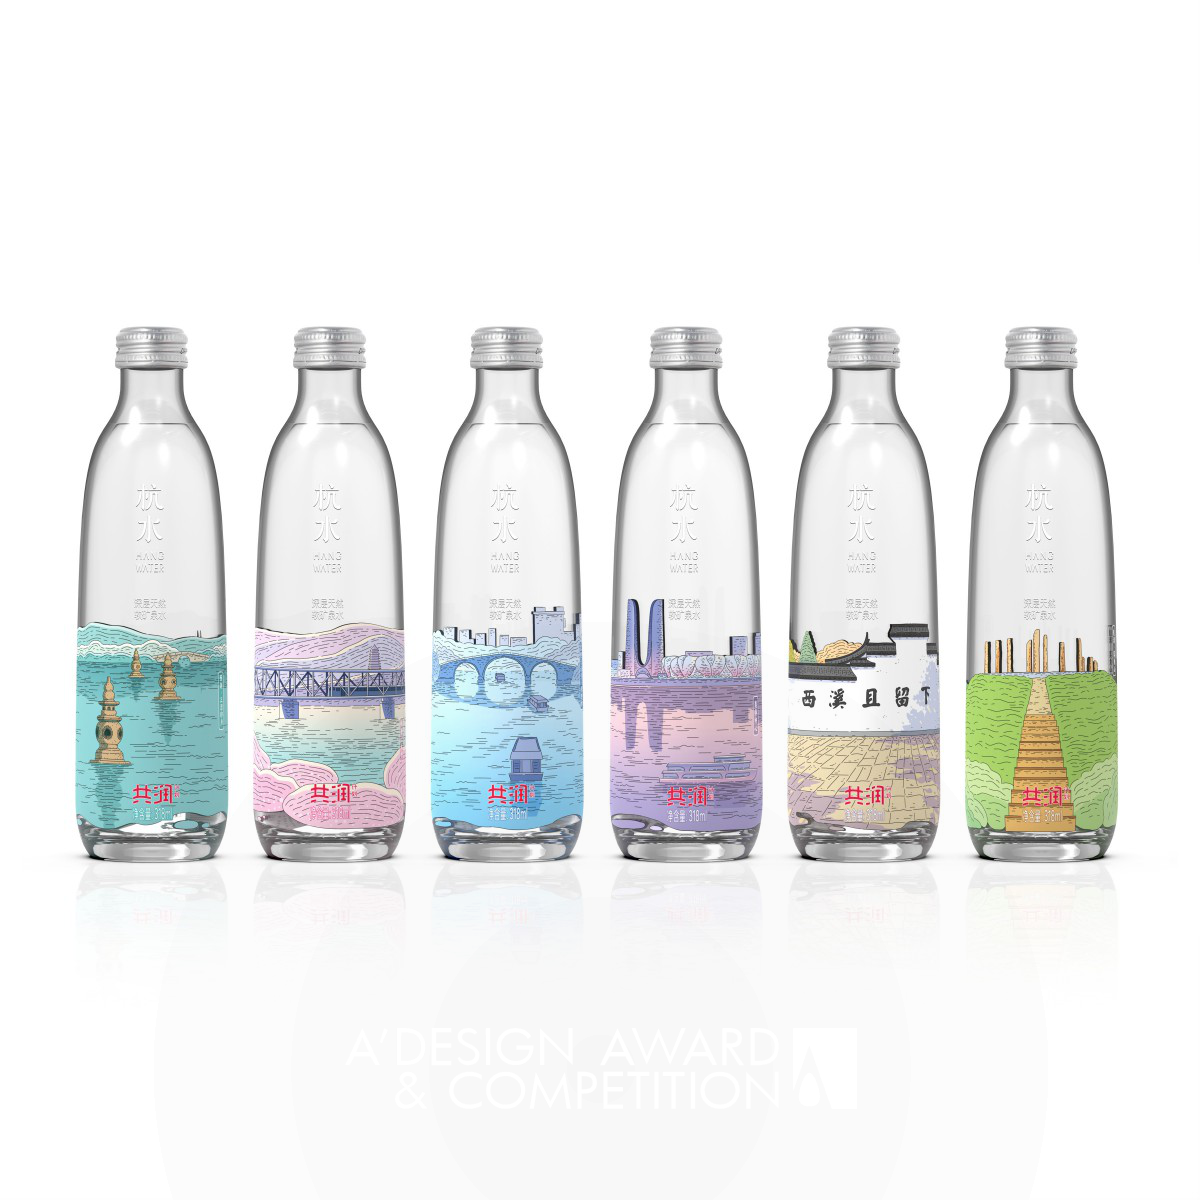 Peng GuoZhi wins Bronze at the prestigious A' Packaging Design Award with Hangzhou Scenery Mineral Water Packaging.